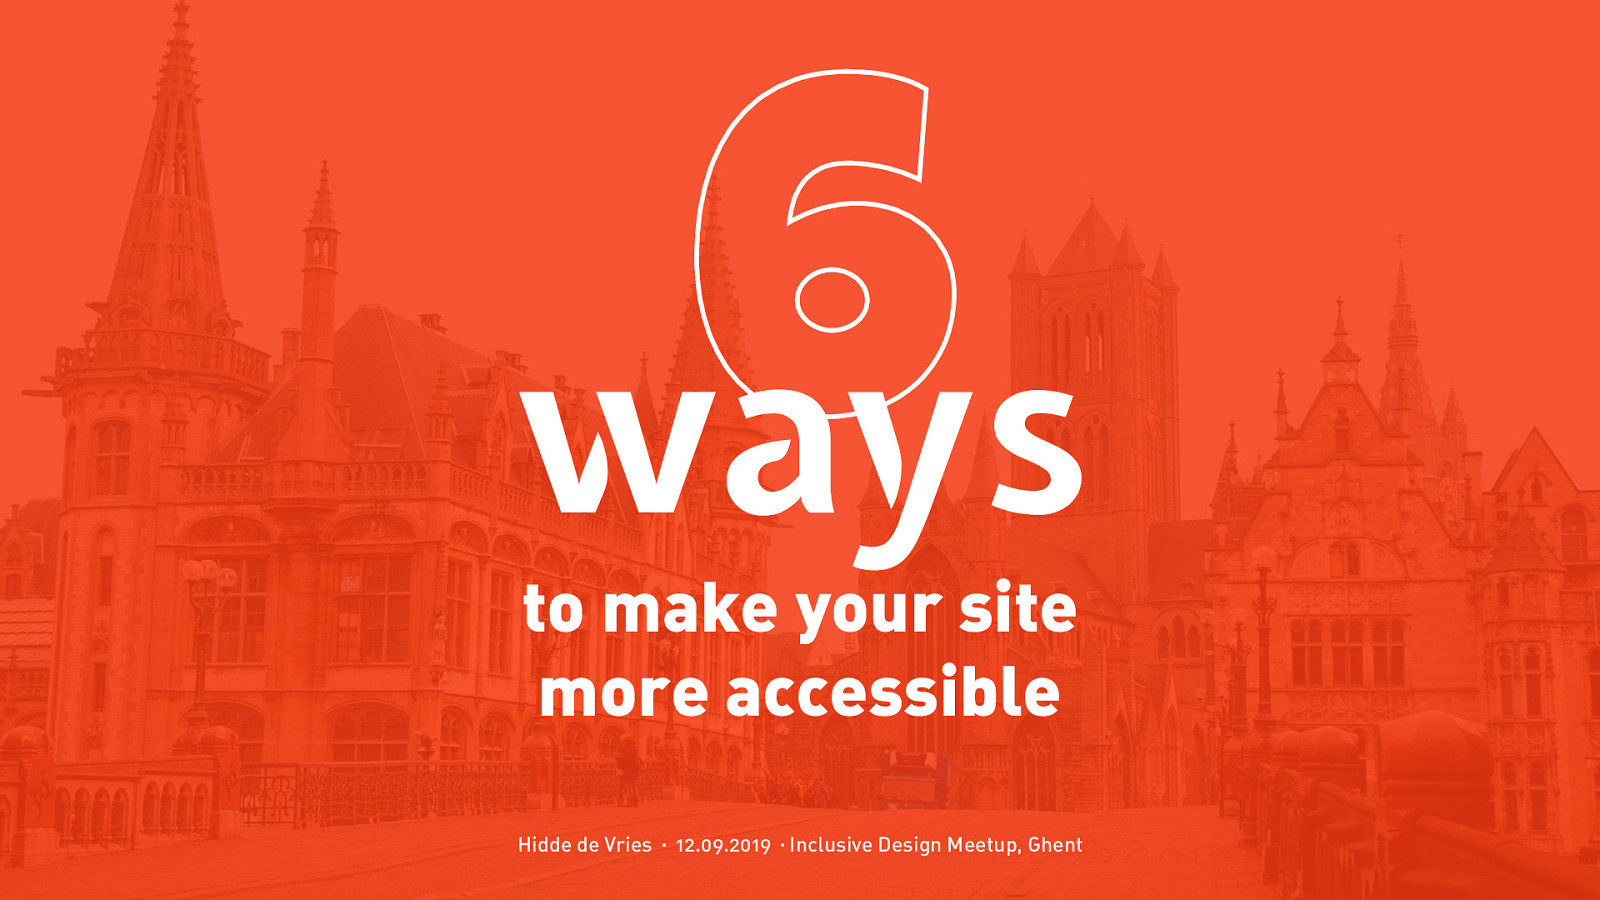 Six ways to make your site more accessible